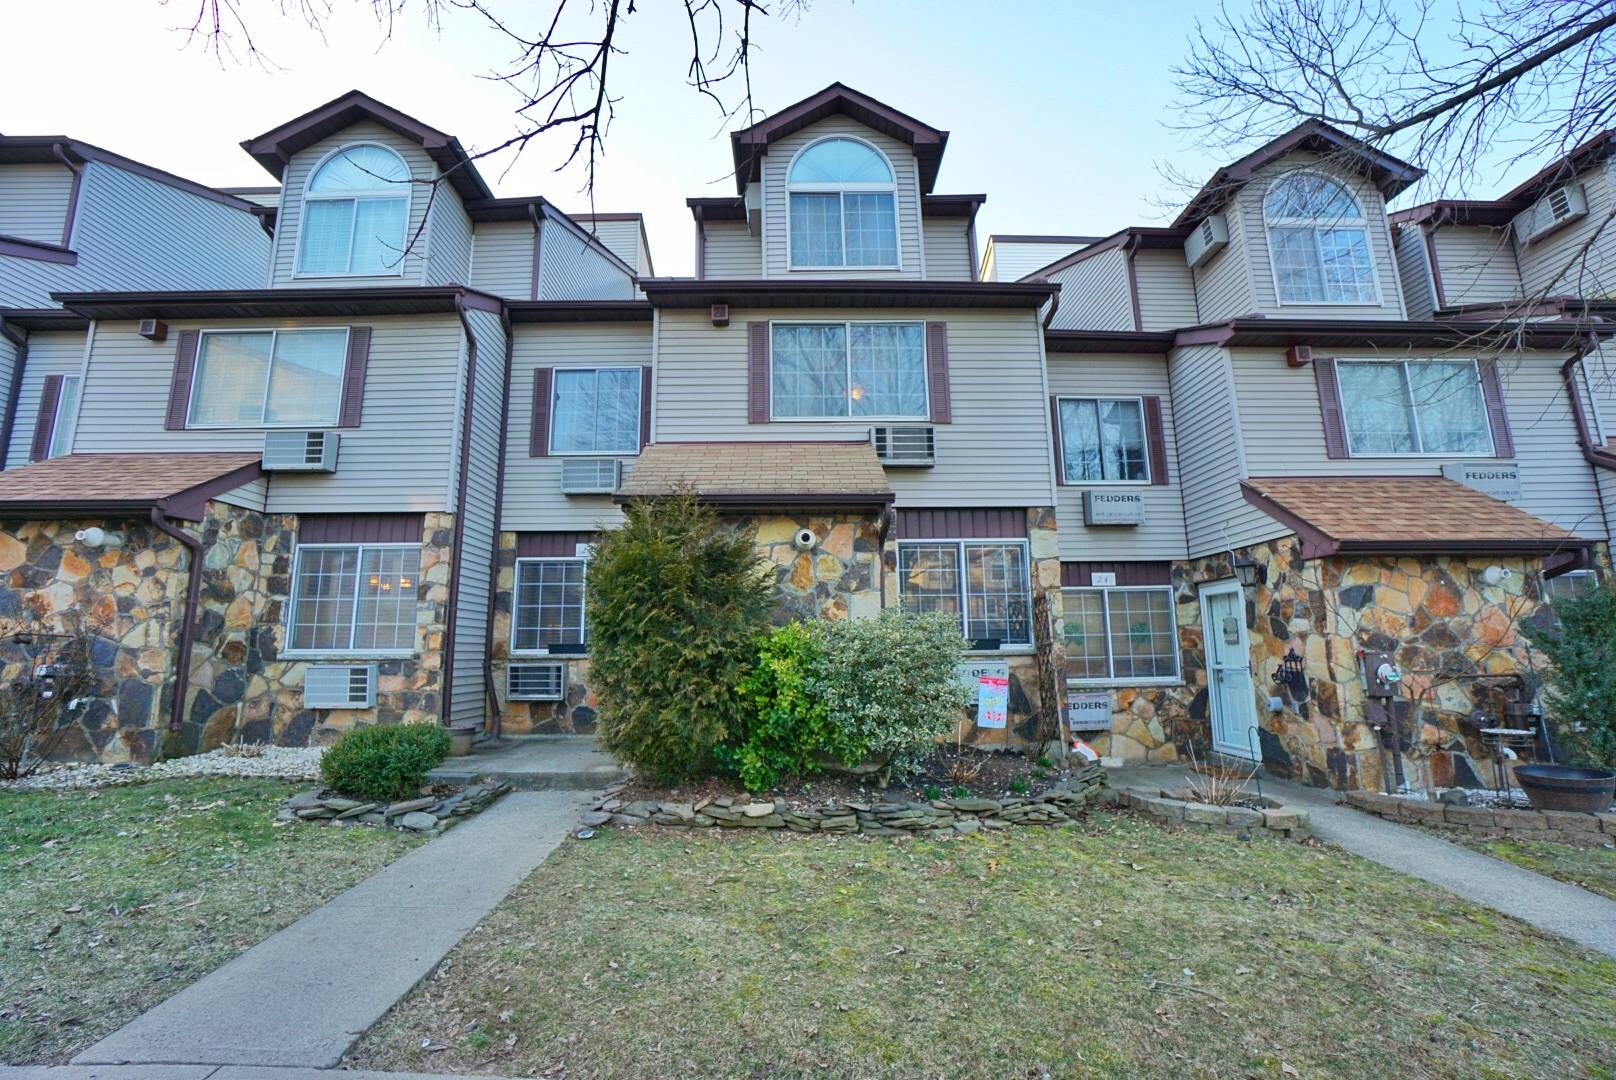 Move Right Into This Beautiful Townhouse In The Desirable Richmond Town Area In a Charming Cul De Sac.